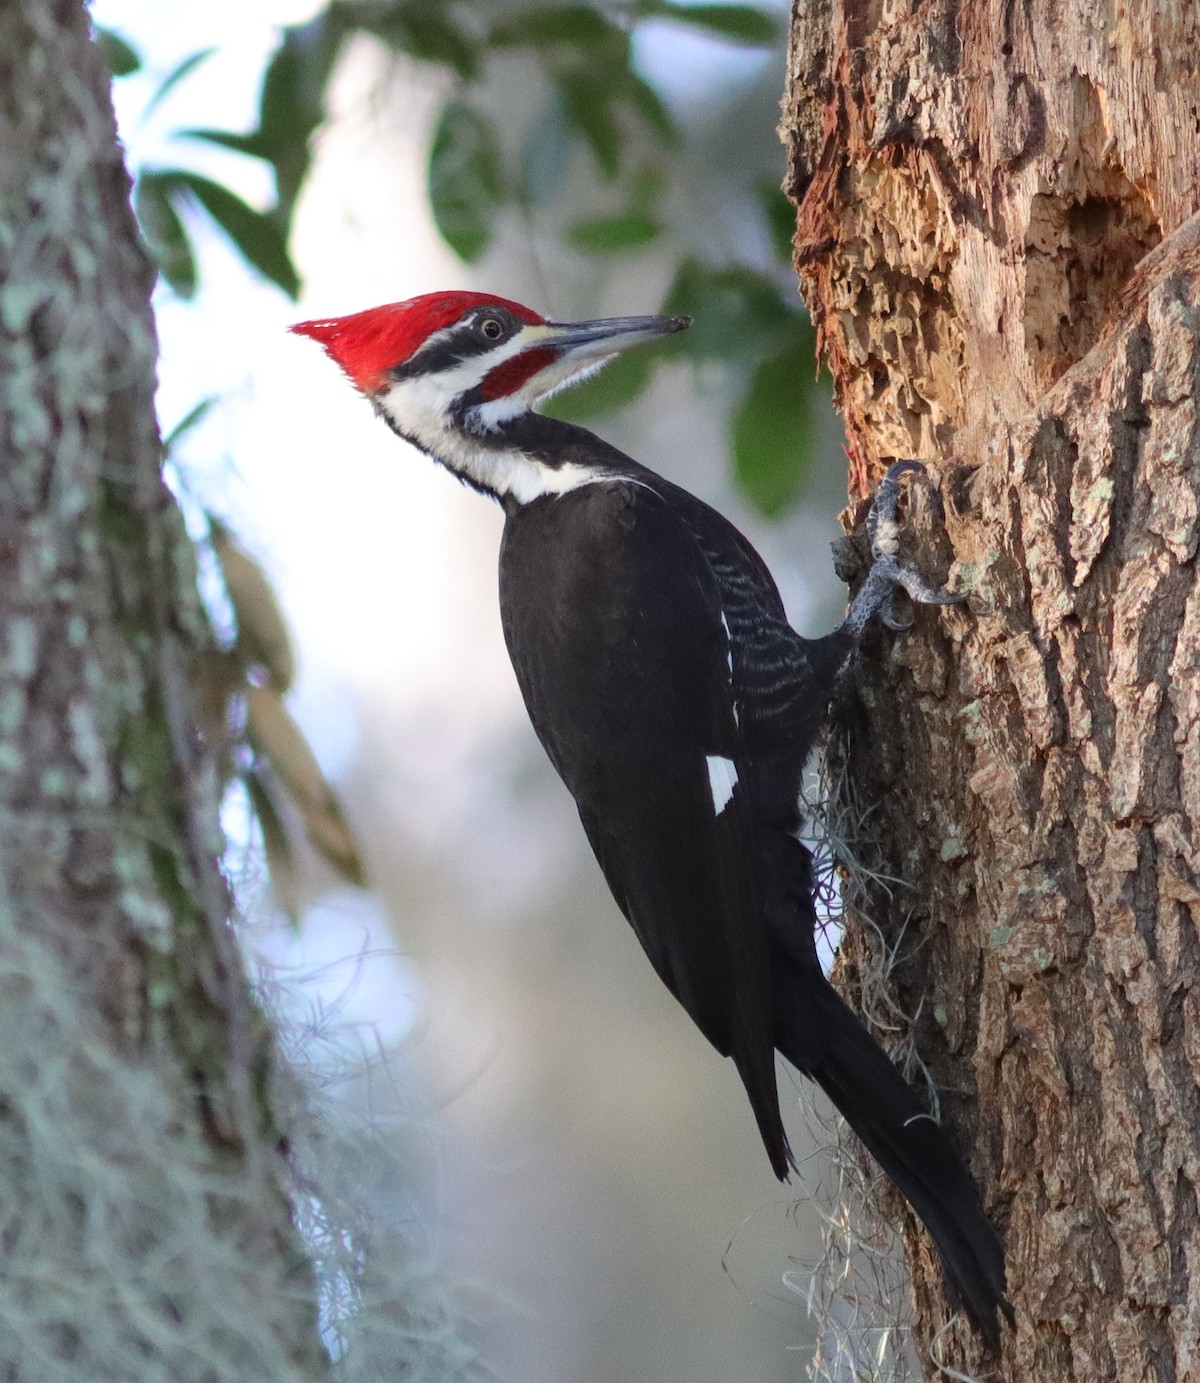 Very Colorful Male Pileated Woodpecker At Hogeye Pathway